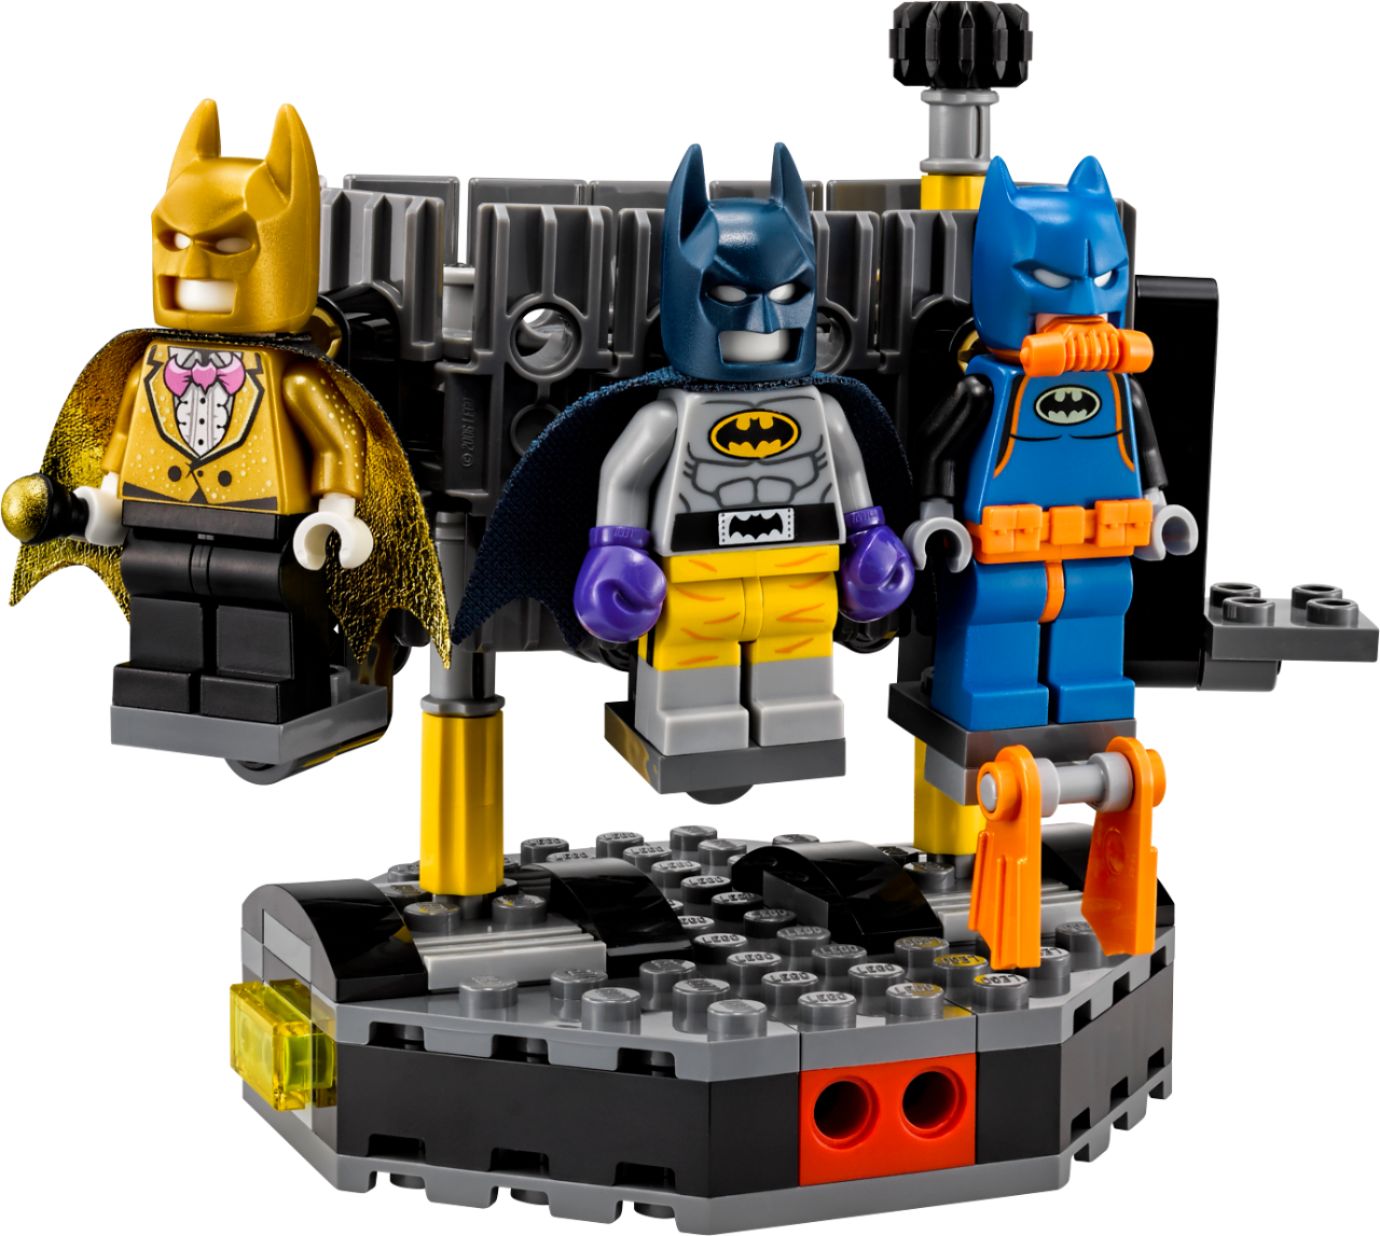 LEGO - Are you ready for more LEGO Batman Movie sets? Get